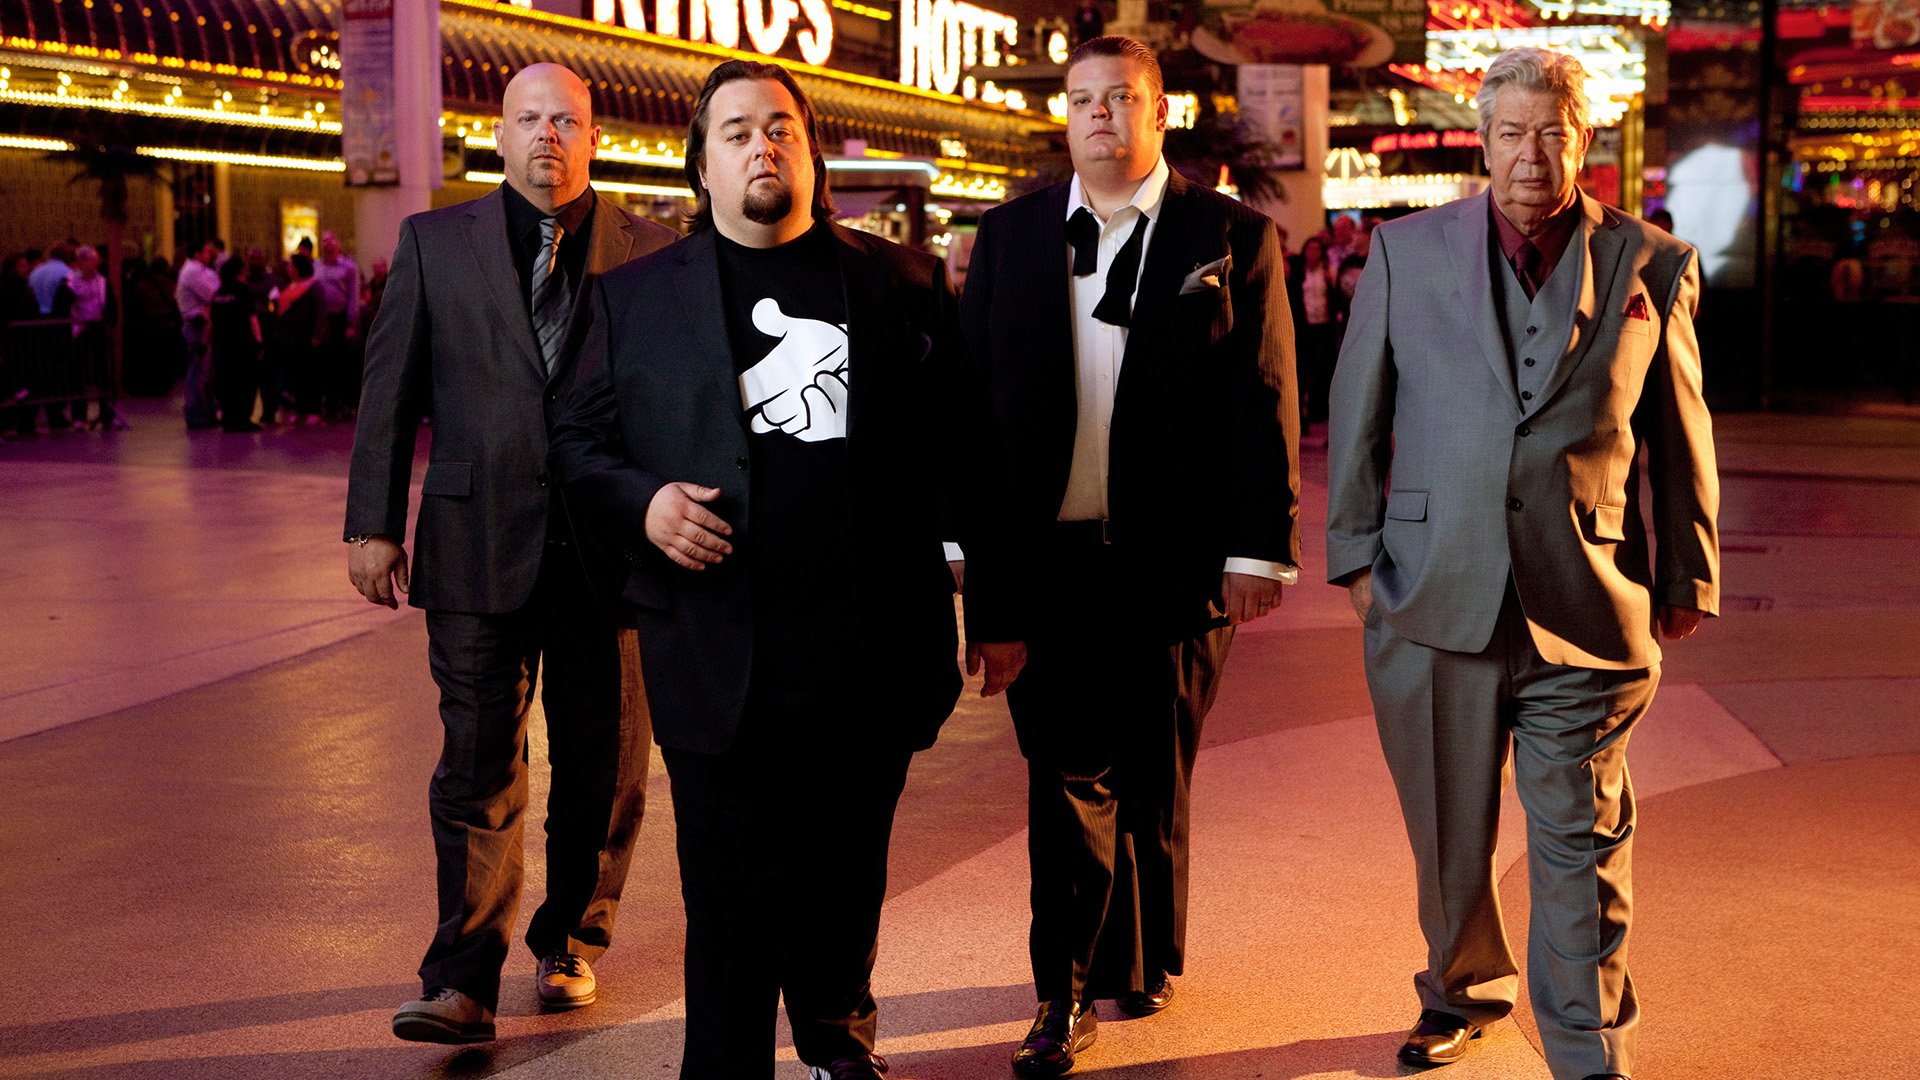 Pawn Stars Wallpapers